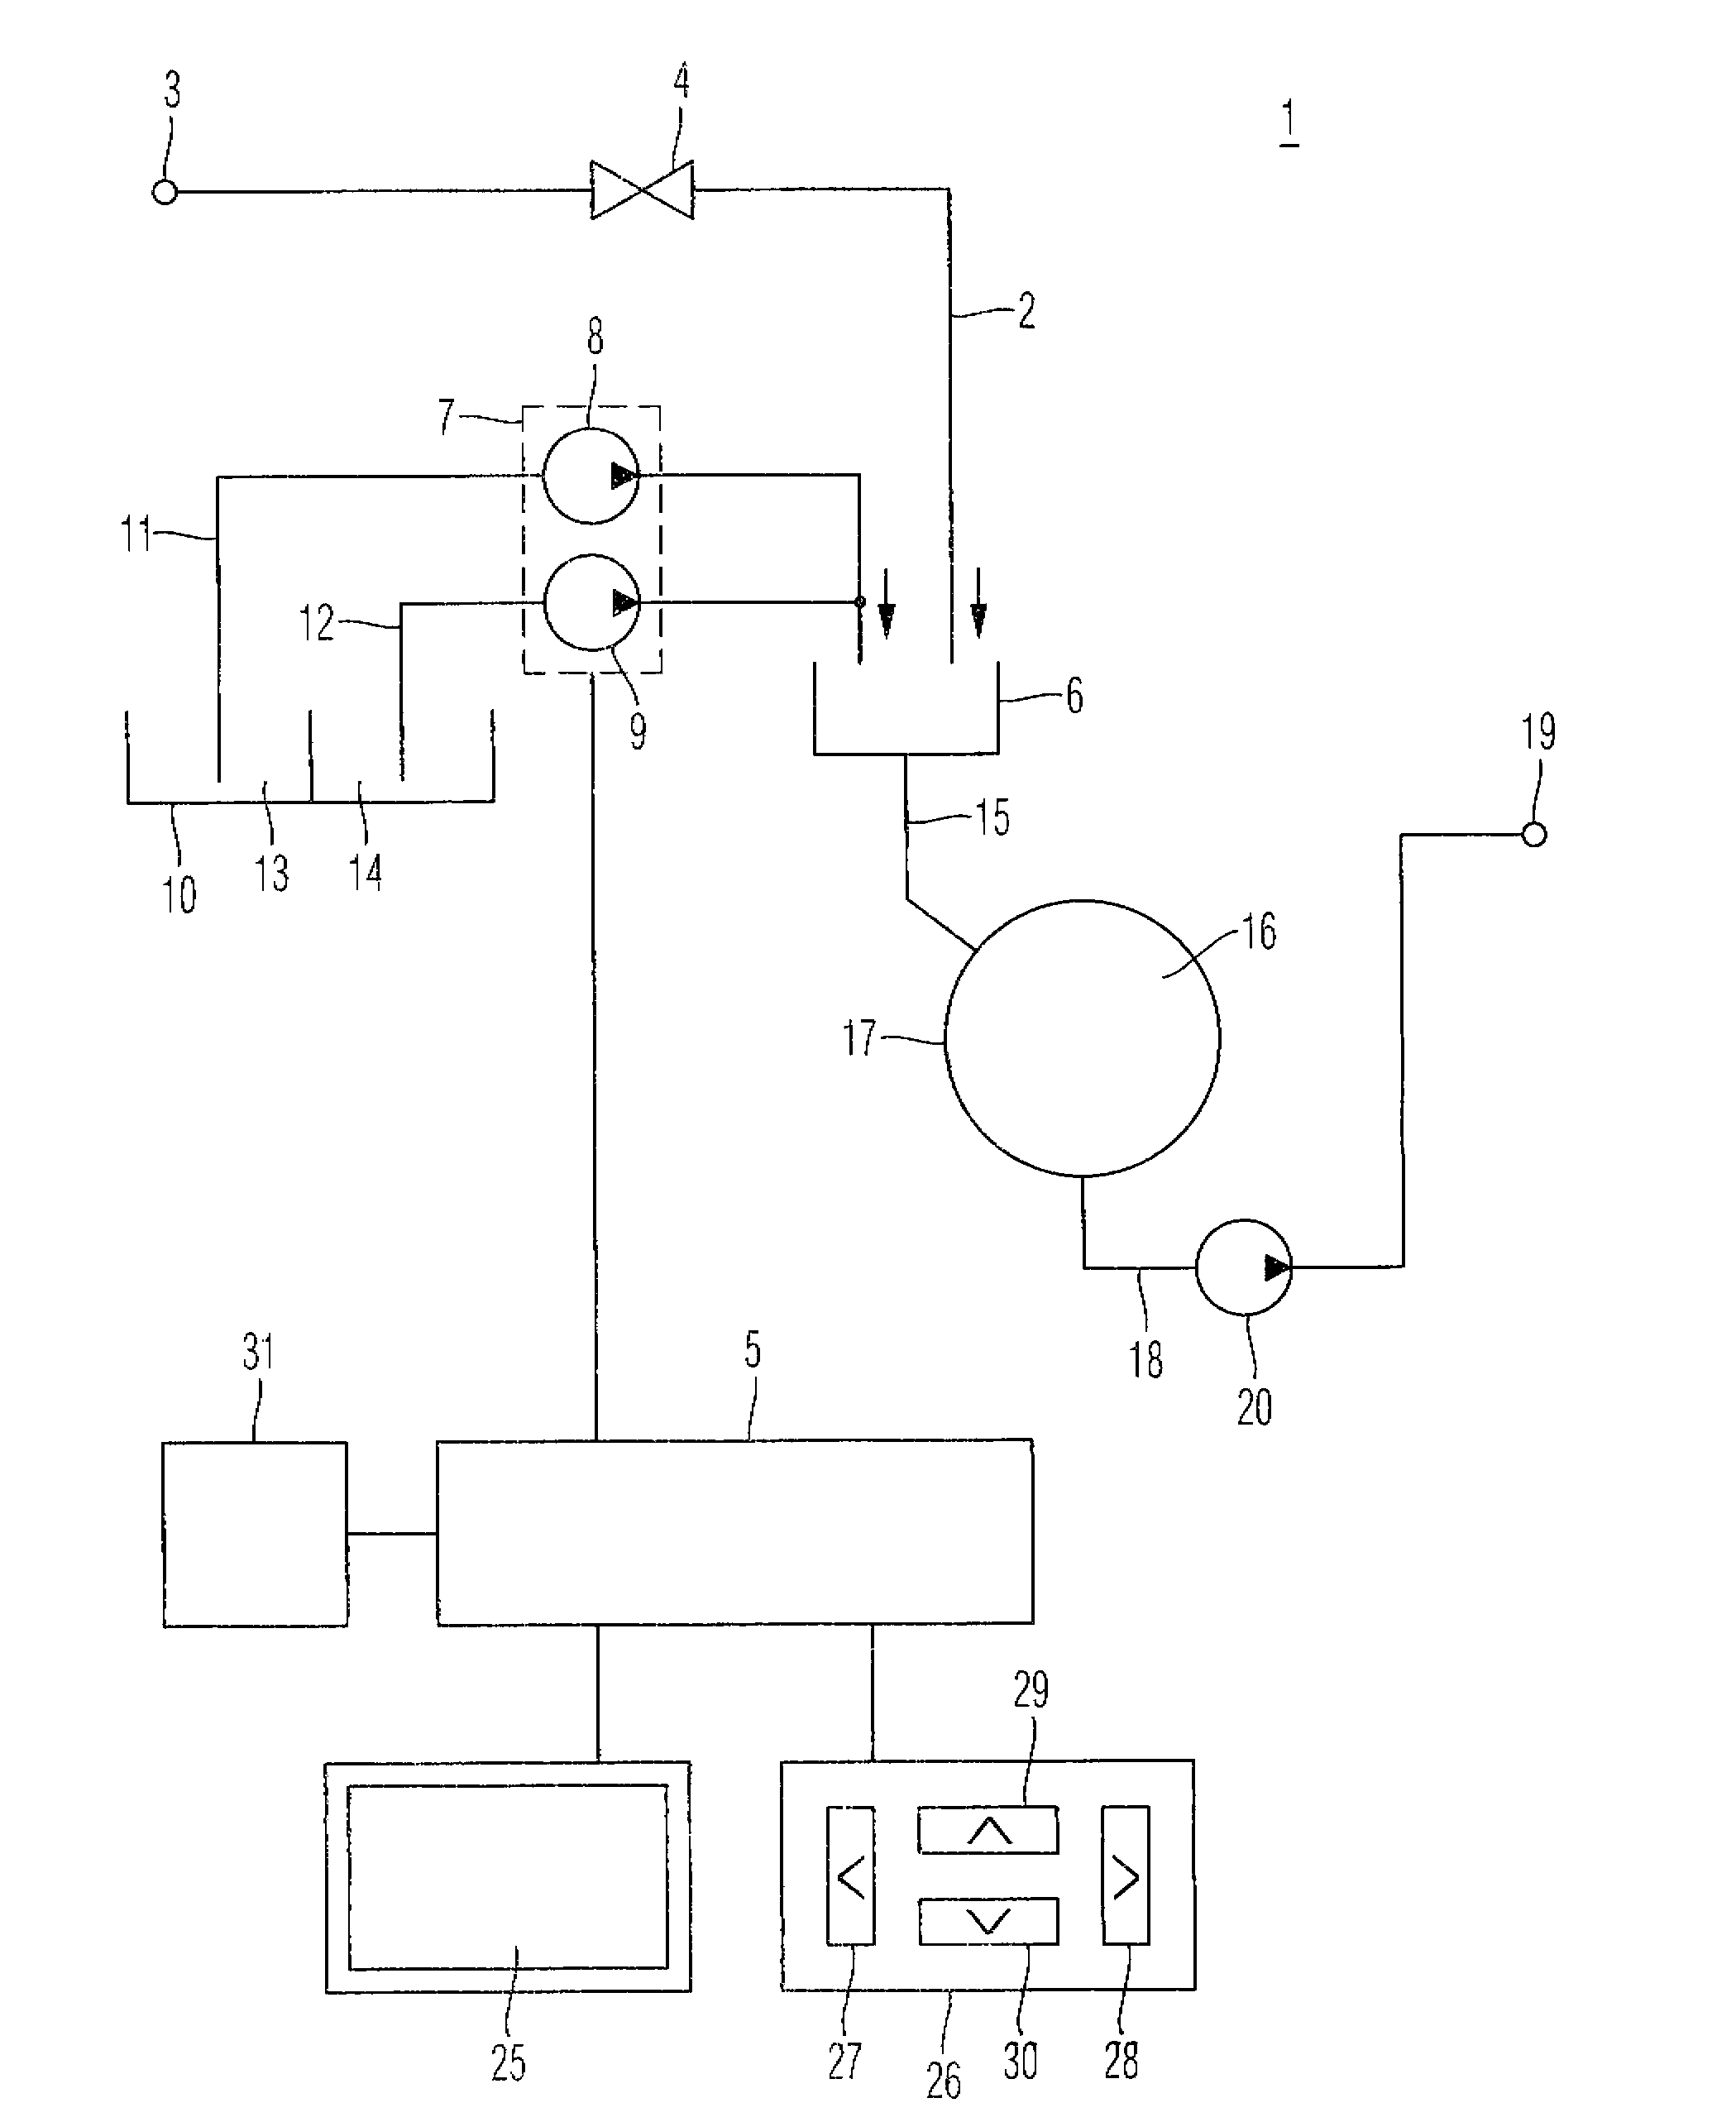 Water-conducting domestic appliance having a metering device and several metering pumps